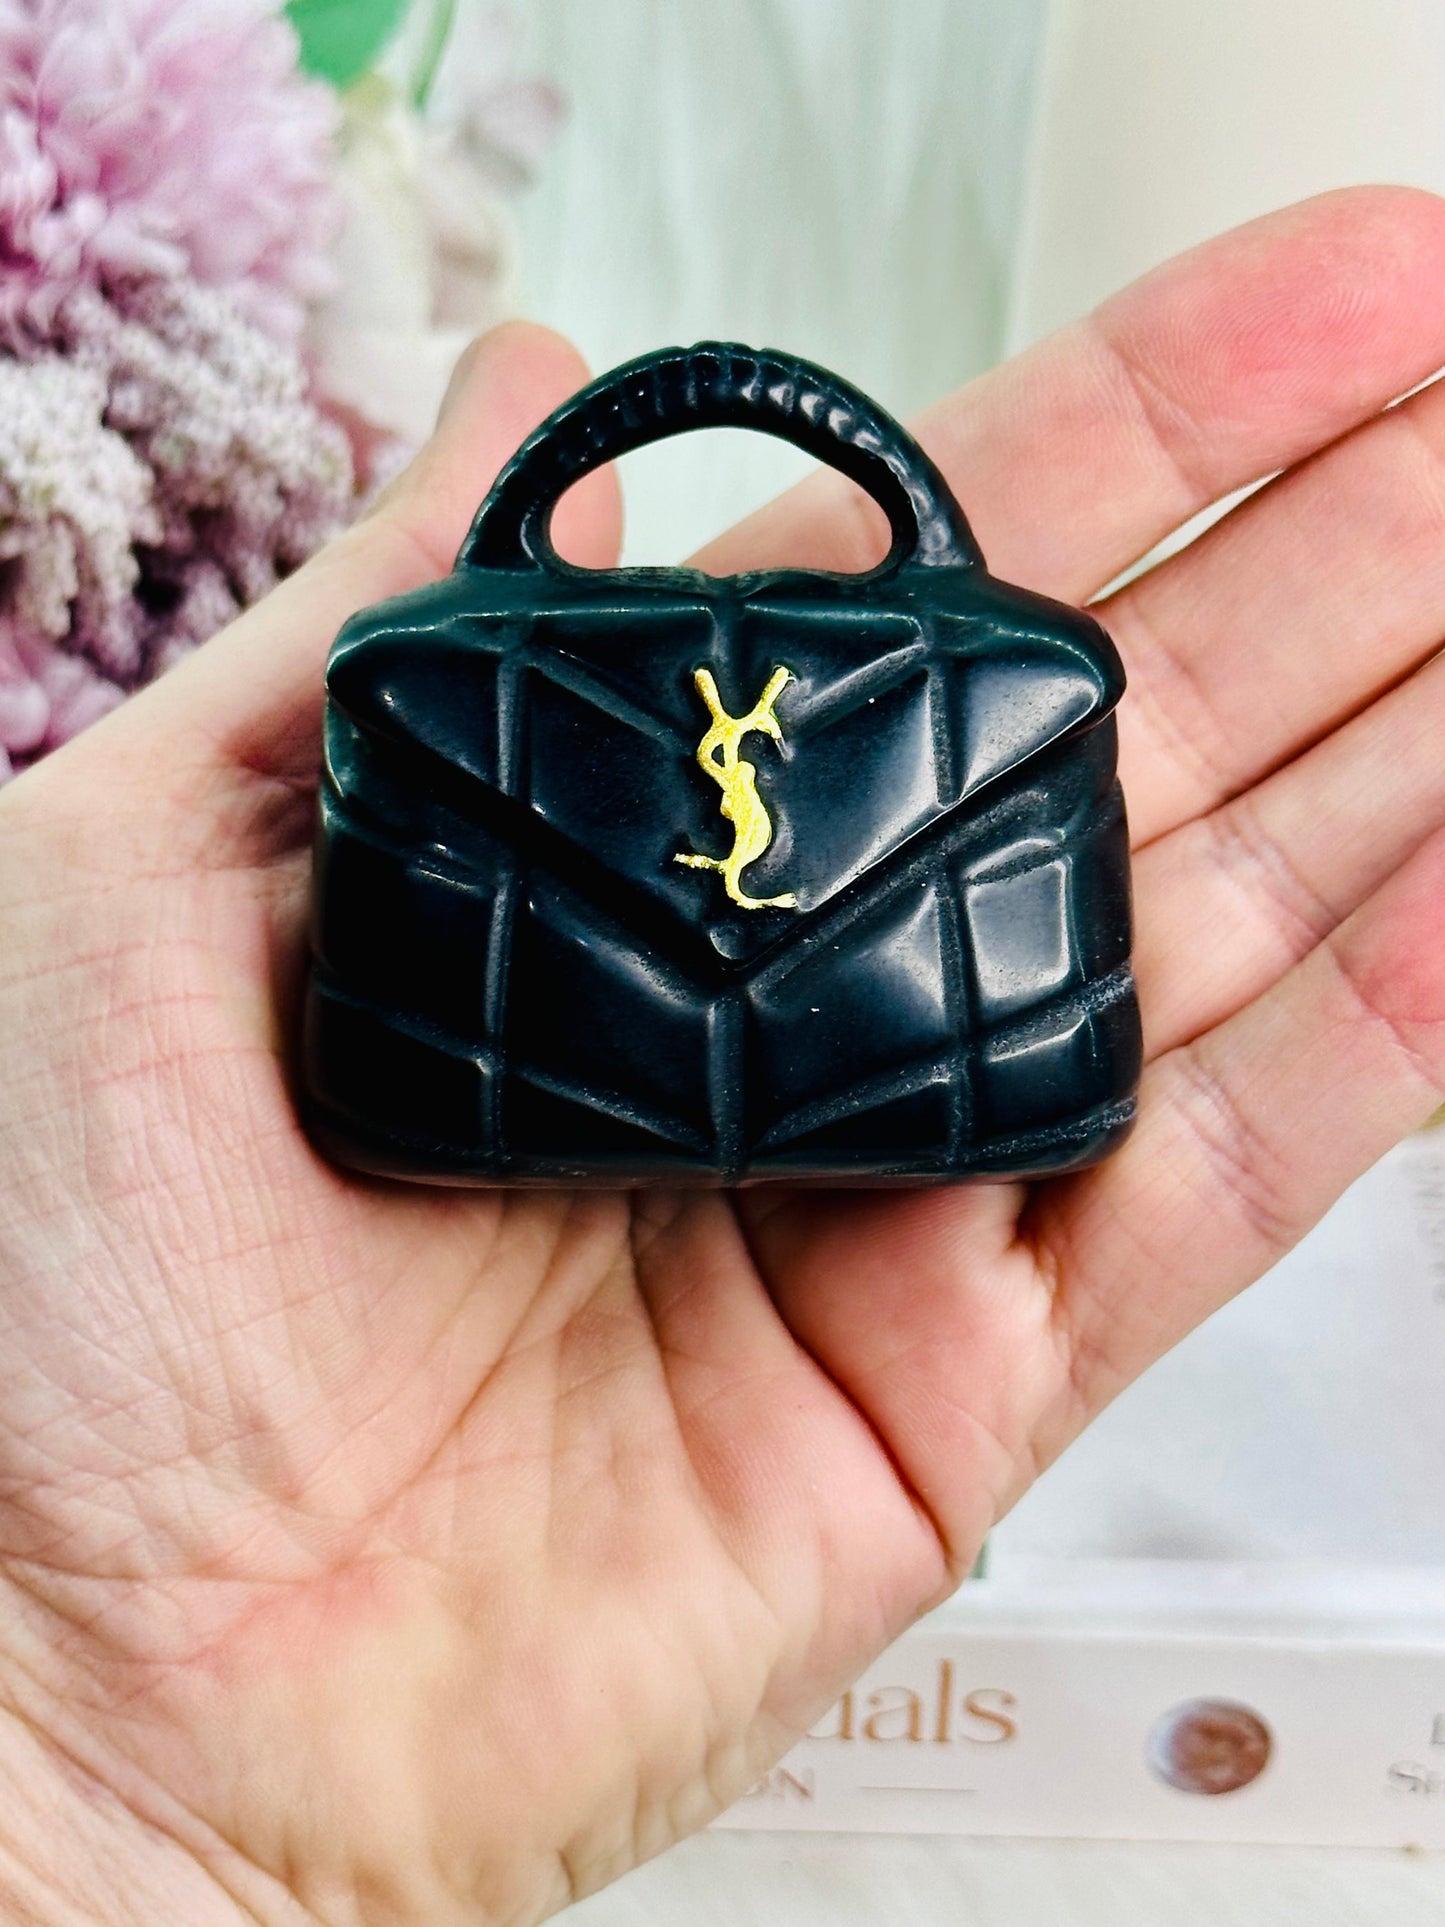 Incredible Deal!!! Set of 4 Black Obsidian Handbag Carvings ~ Gucci, Yves Saint Laurent, Christian Dior, Chanel ~ Individual Price $49 each ~ Package Price $149 (Save $47) xx